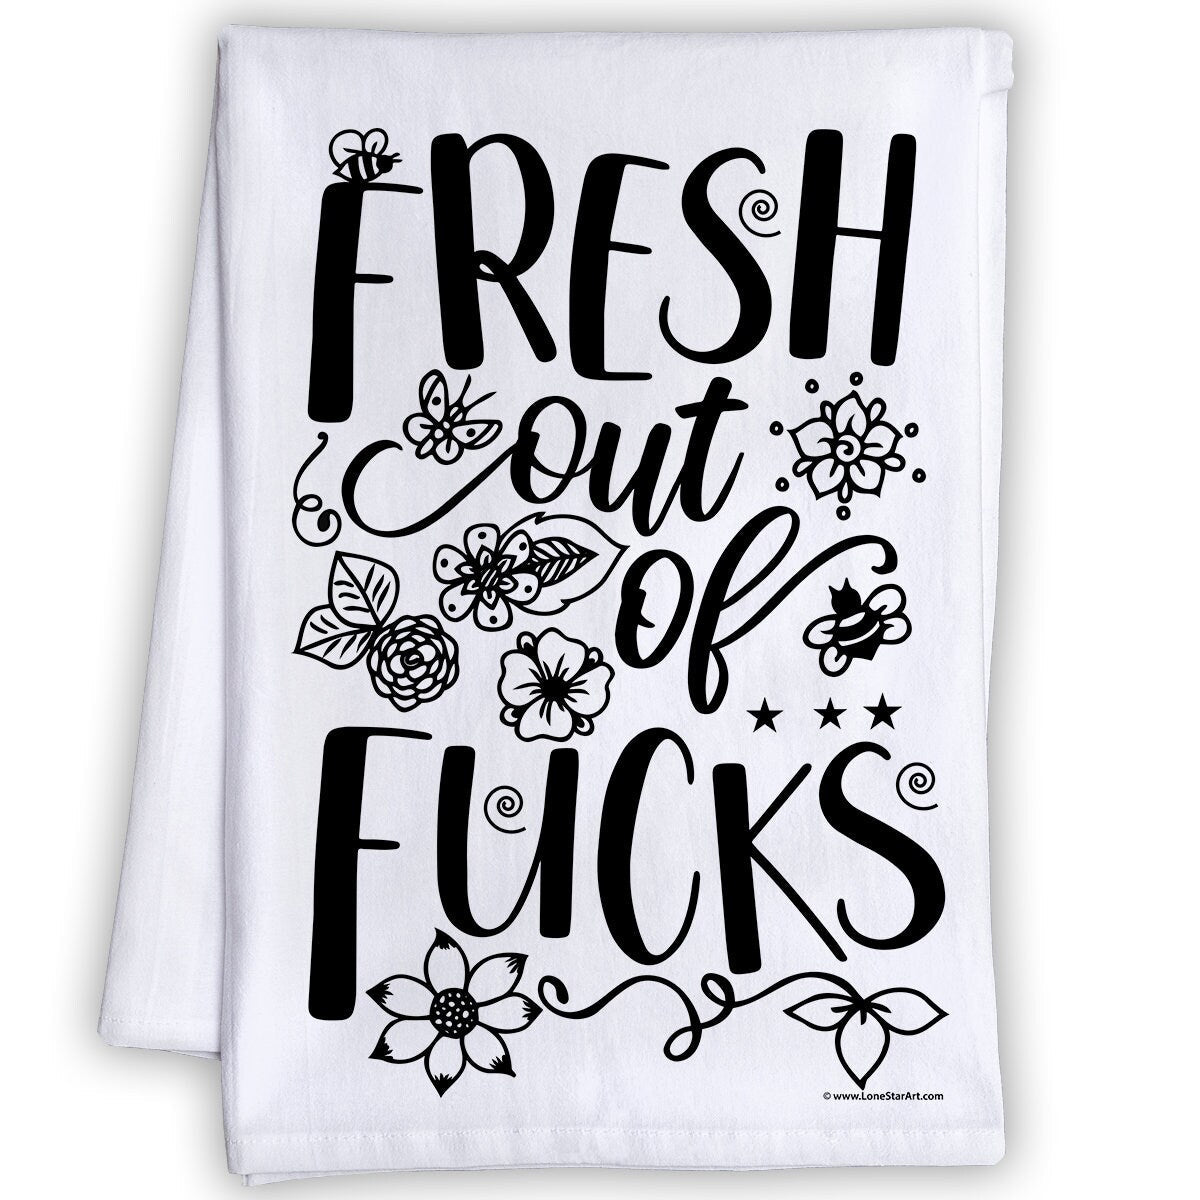  Decorative Kitchen Towels - Funny Kitchen Towels with Sayings, Tea  Towels For Kitchen, Funny Dish Towels, Perfect for Housewarming Gift  Christmas Mothers Day Birthday (Funny Sayings) : Home & Kitchen